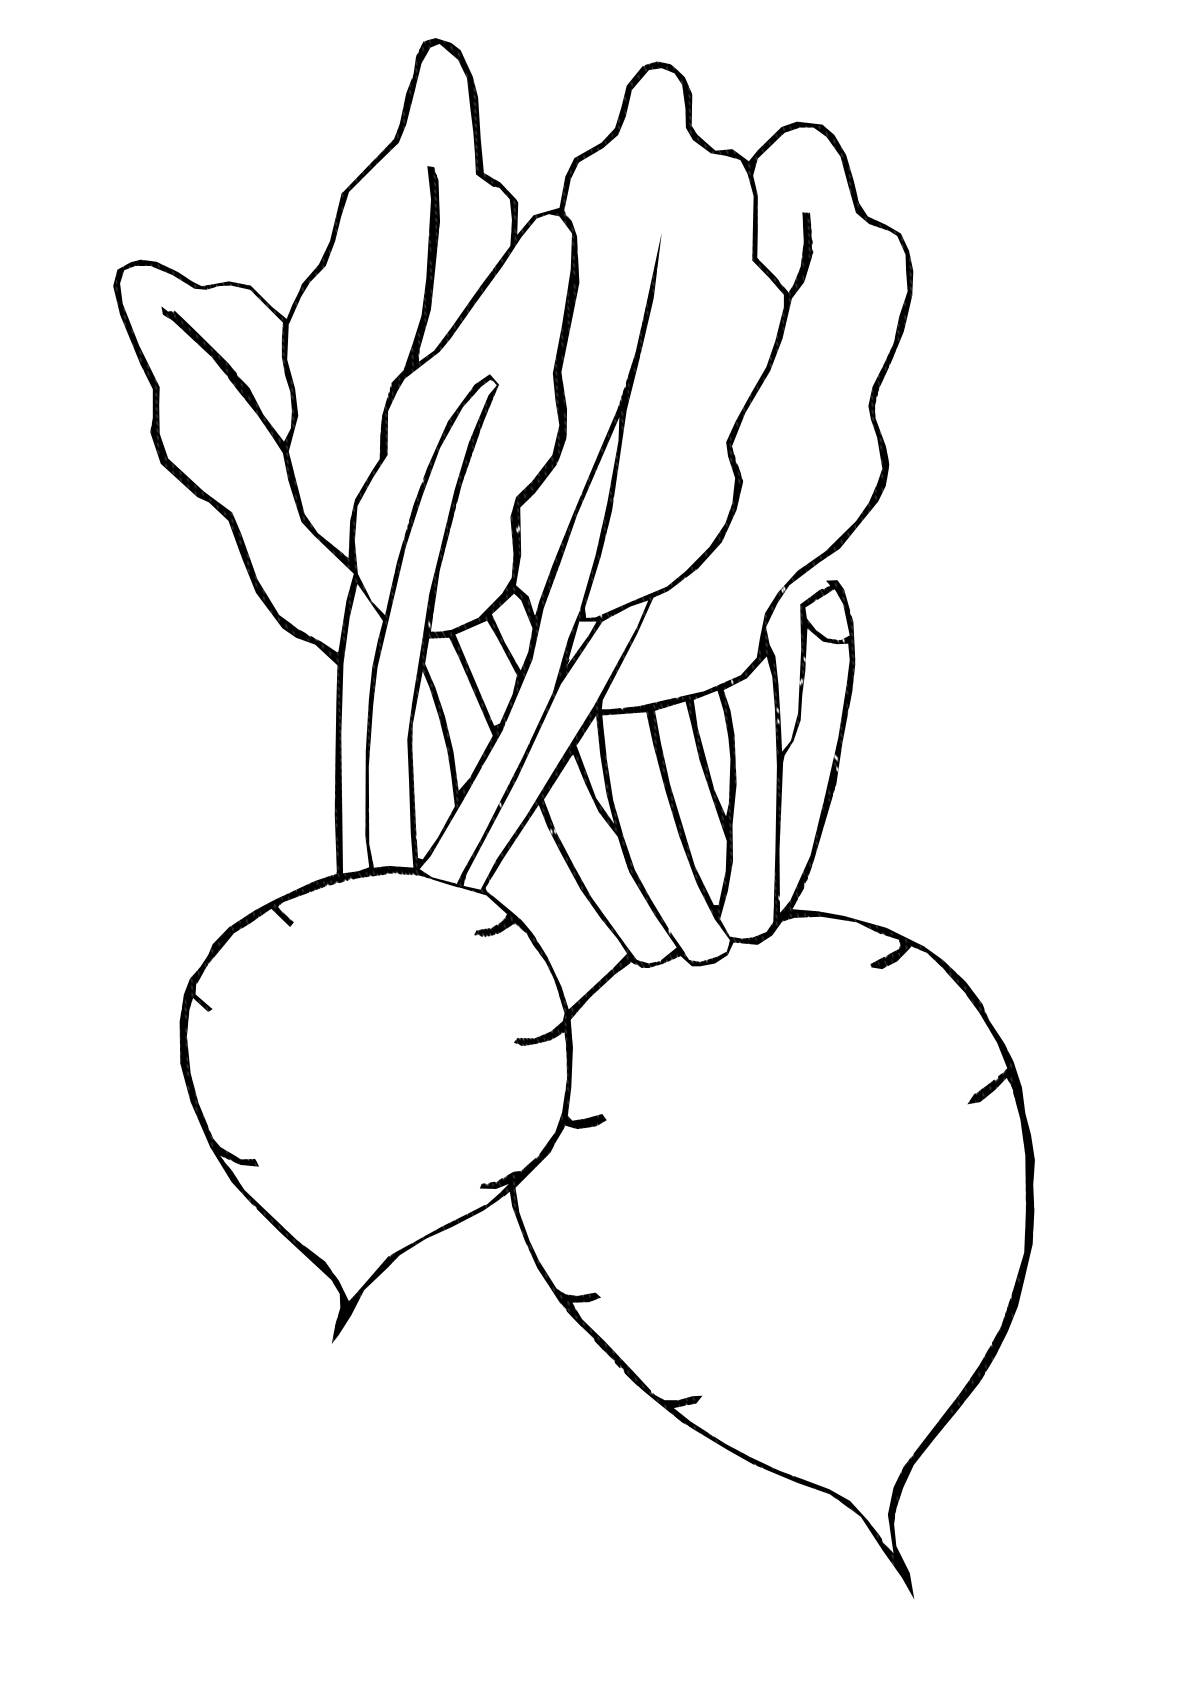 Beetroot coloring page